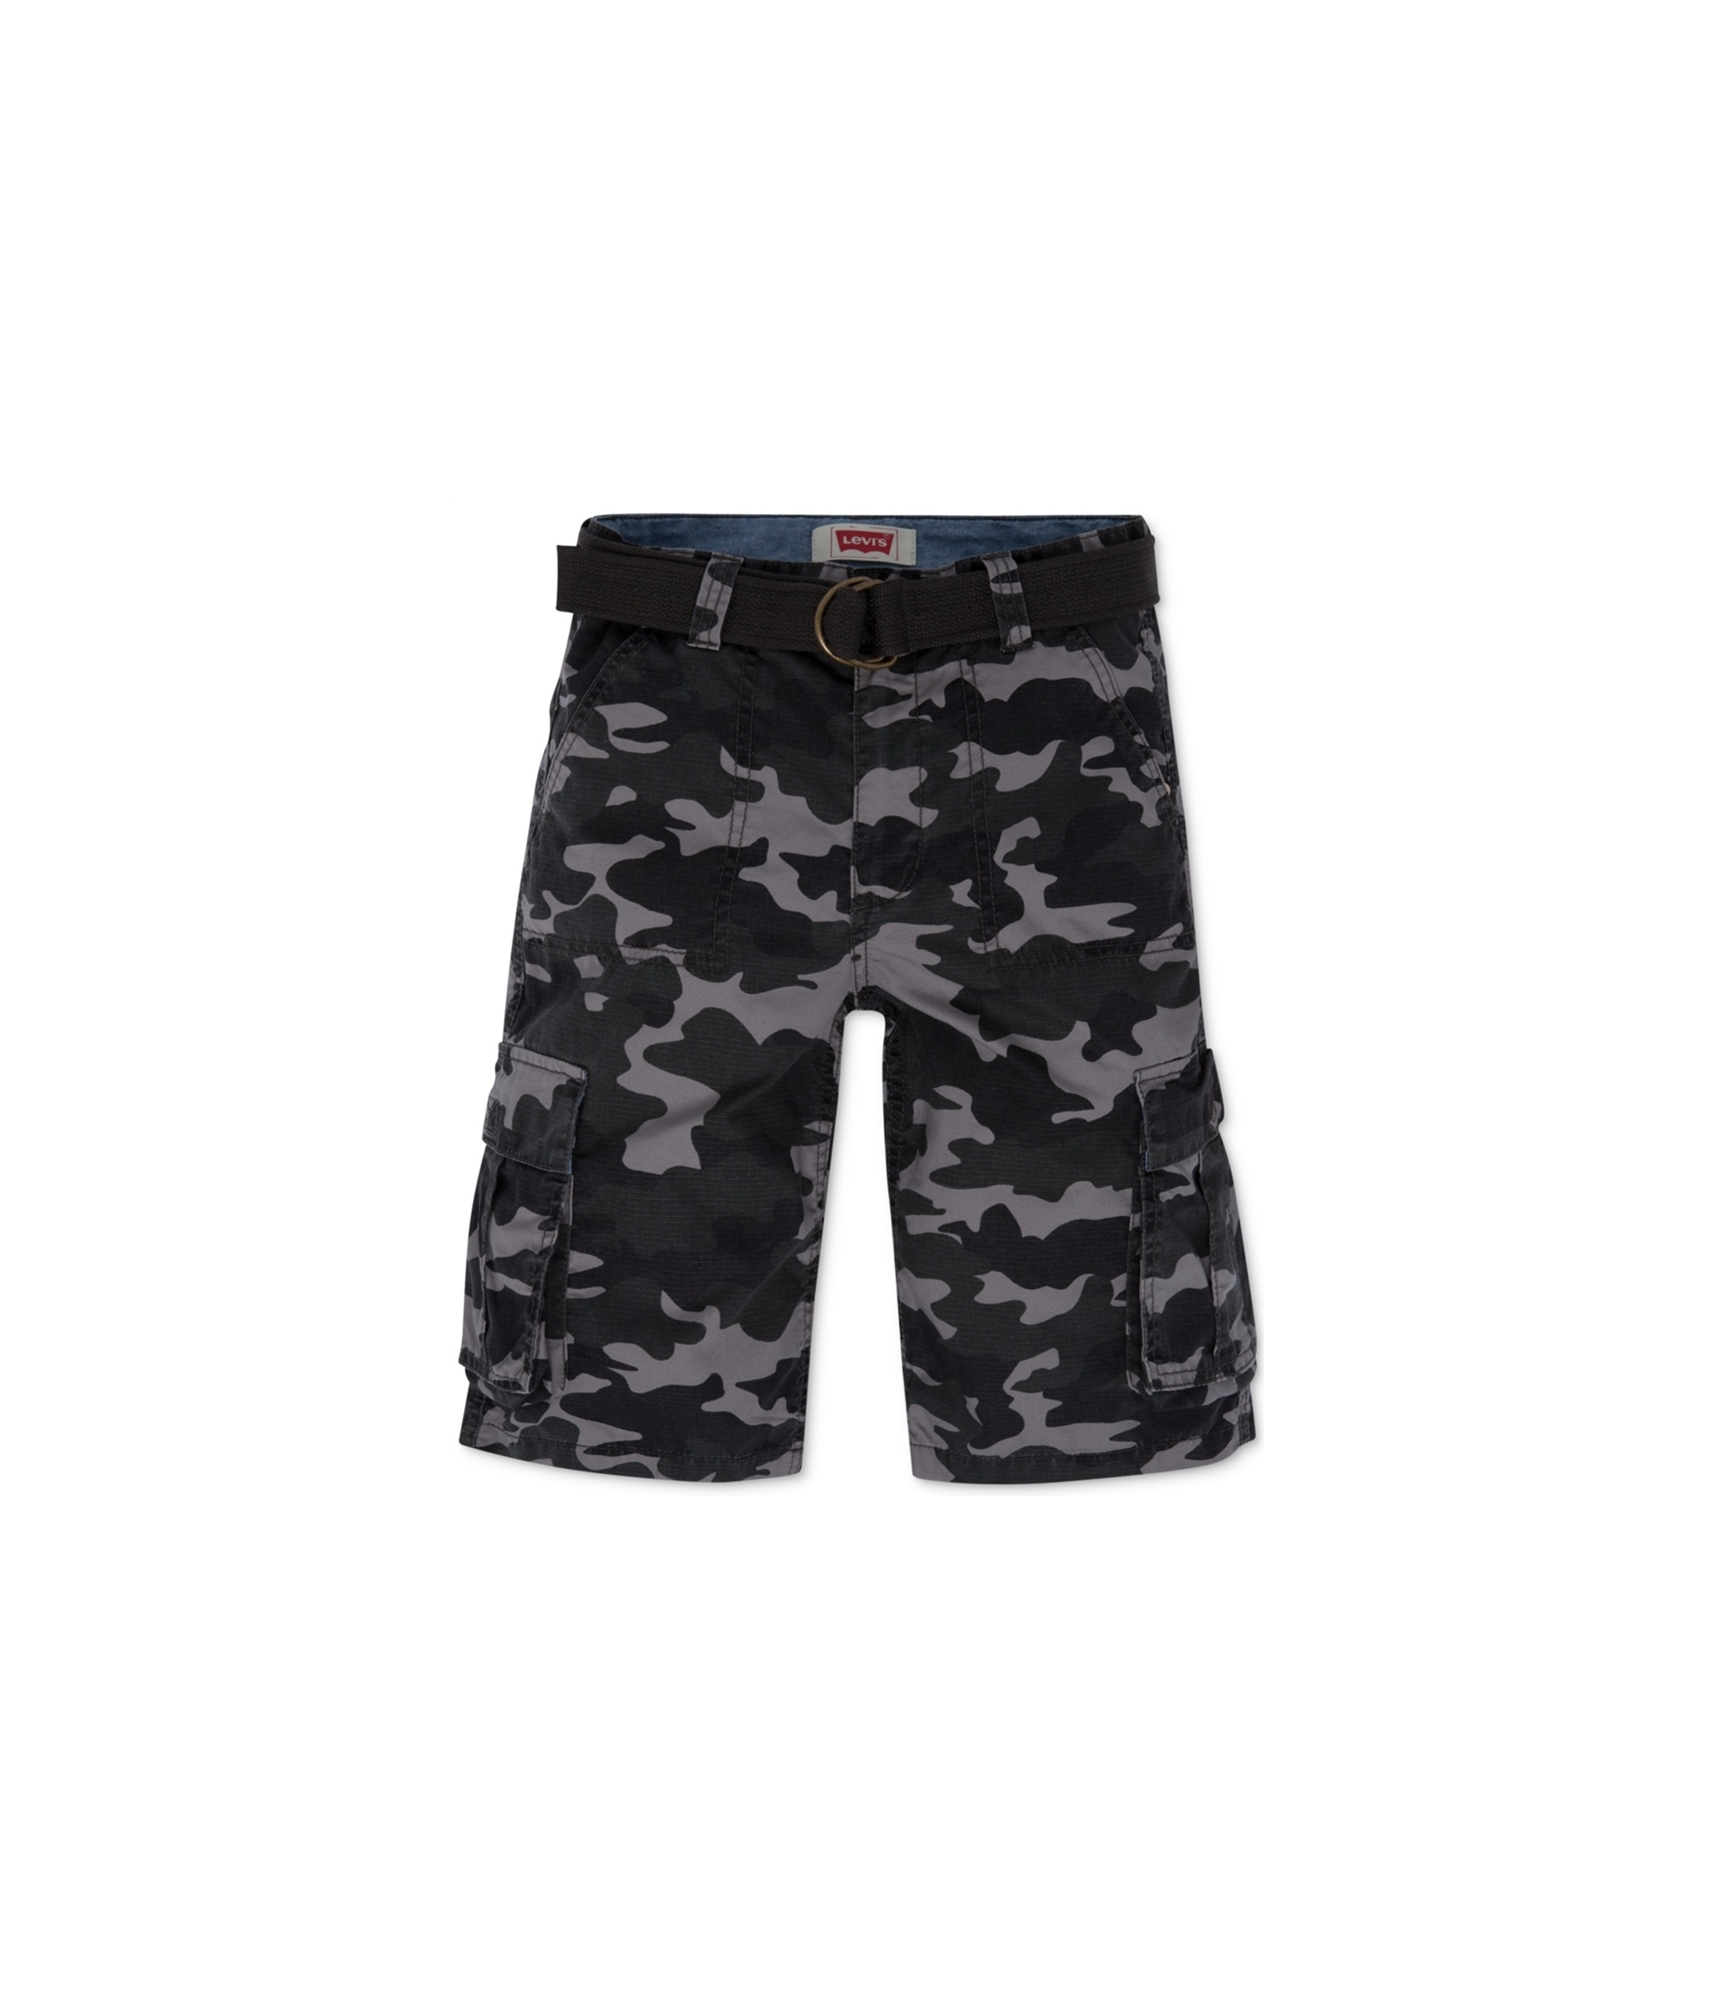 Buy Boys Levi's Ripstop Casual Cargo Shorts Online | TagsWeekly.com